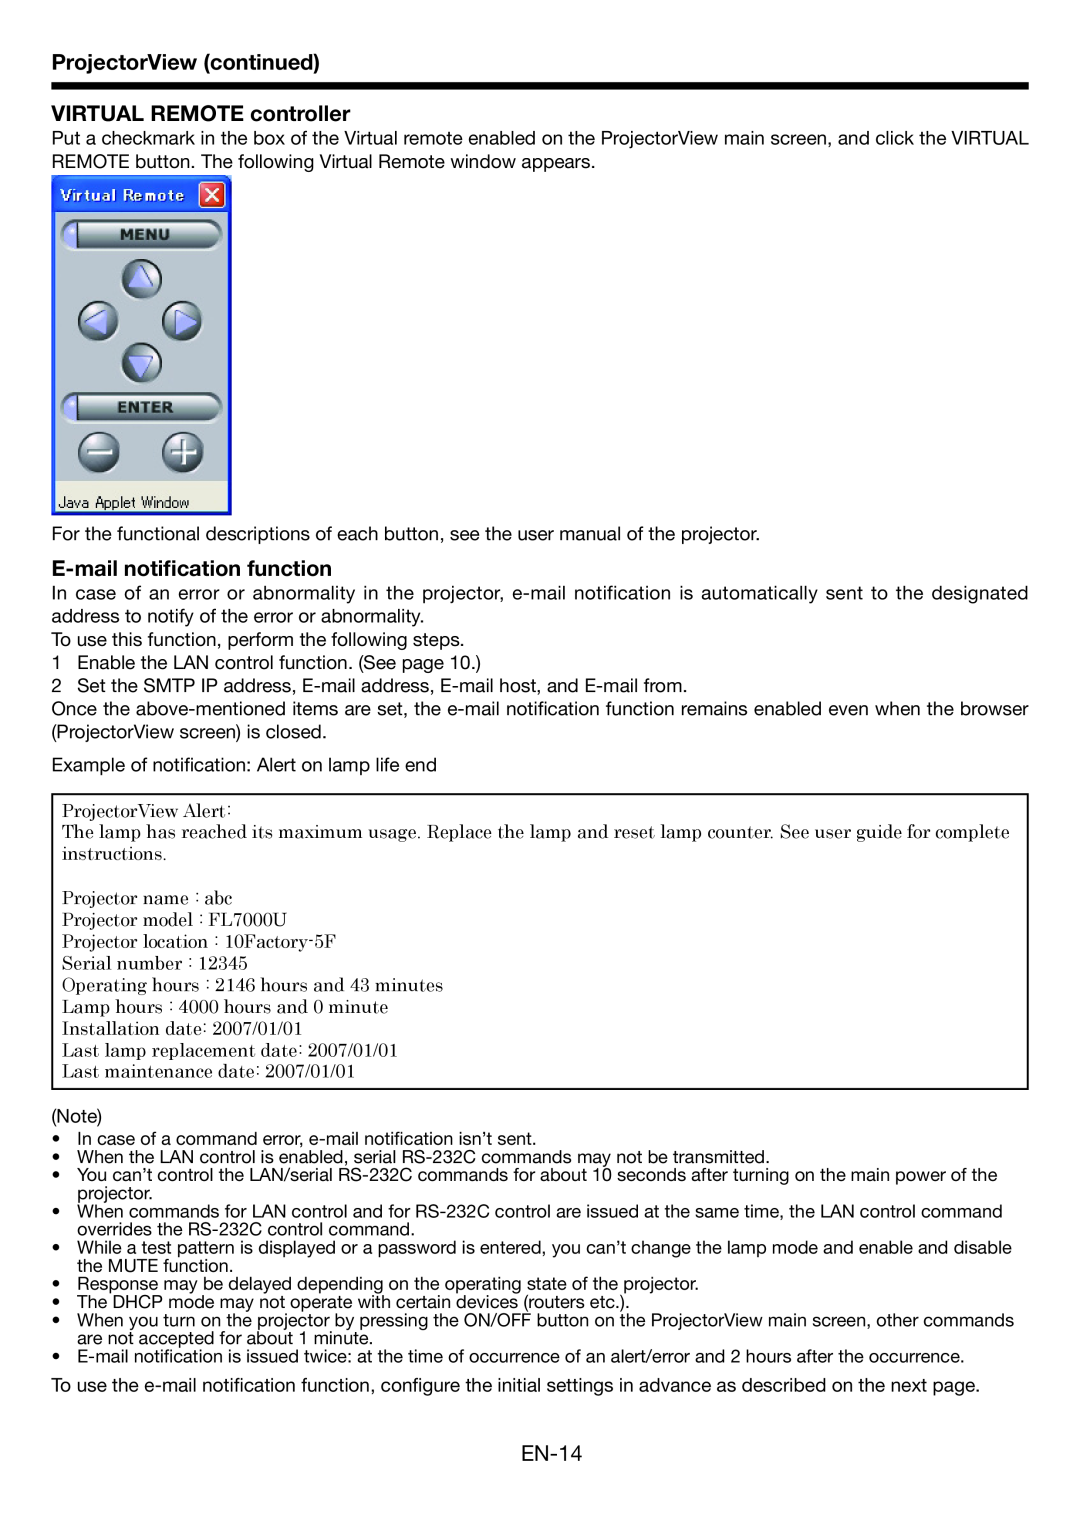 Mitsubishi Electronics FL7000U ProjectorView continued VIRTUAL REMOTE controller, E-mail notiﬁcation function, EN-14 